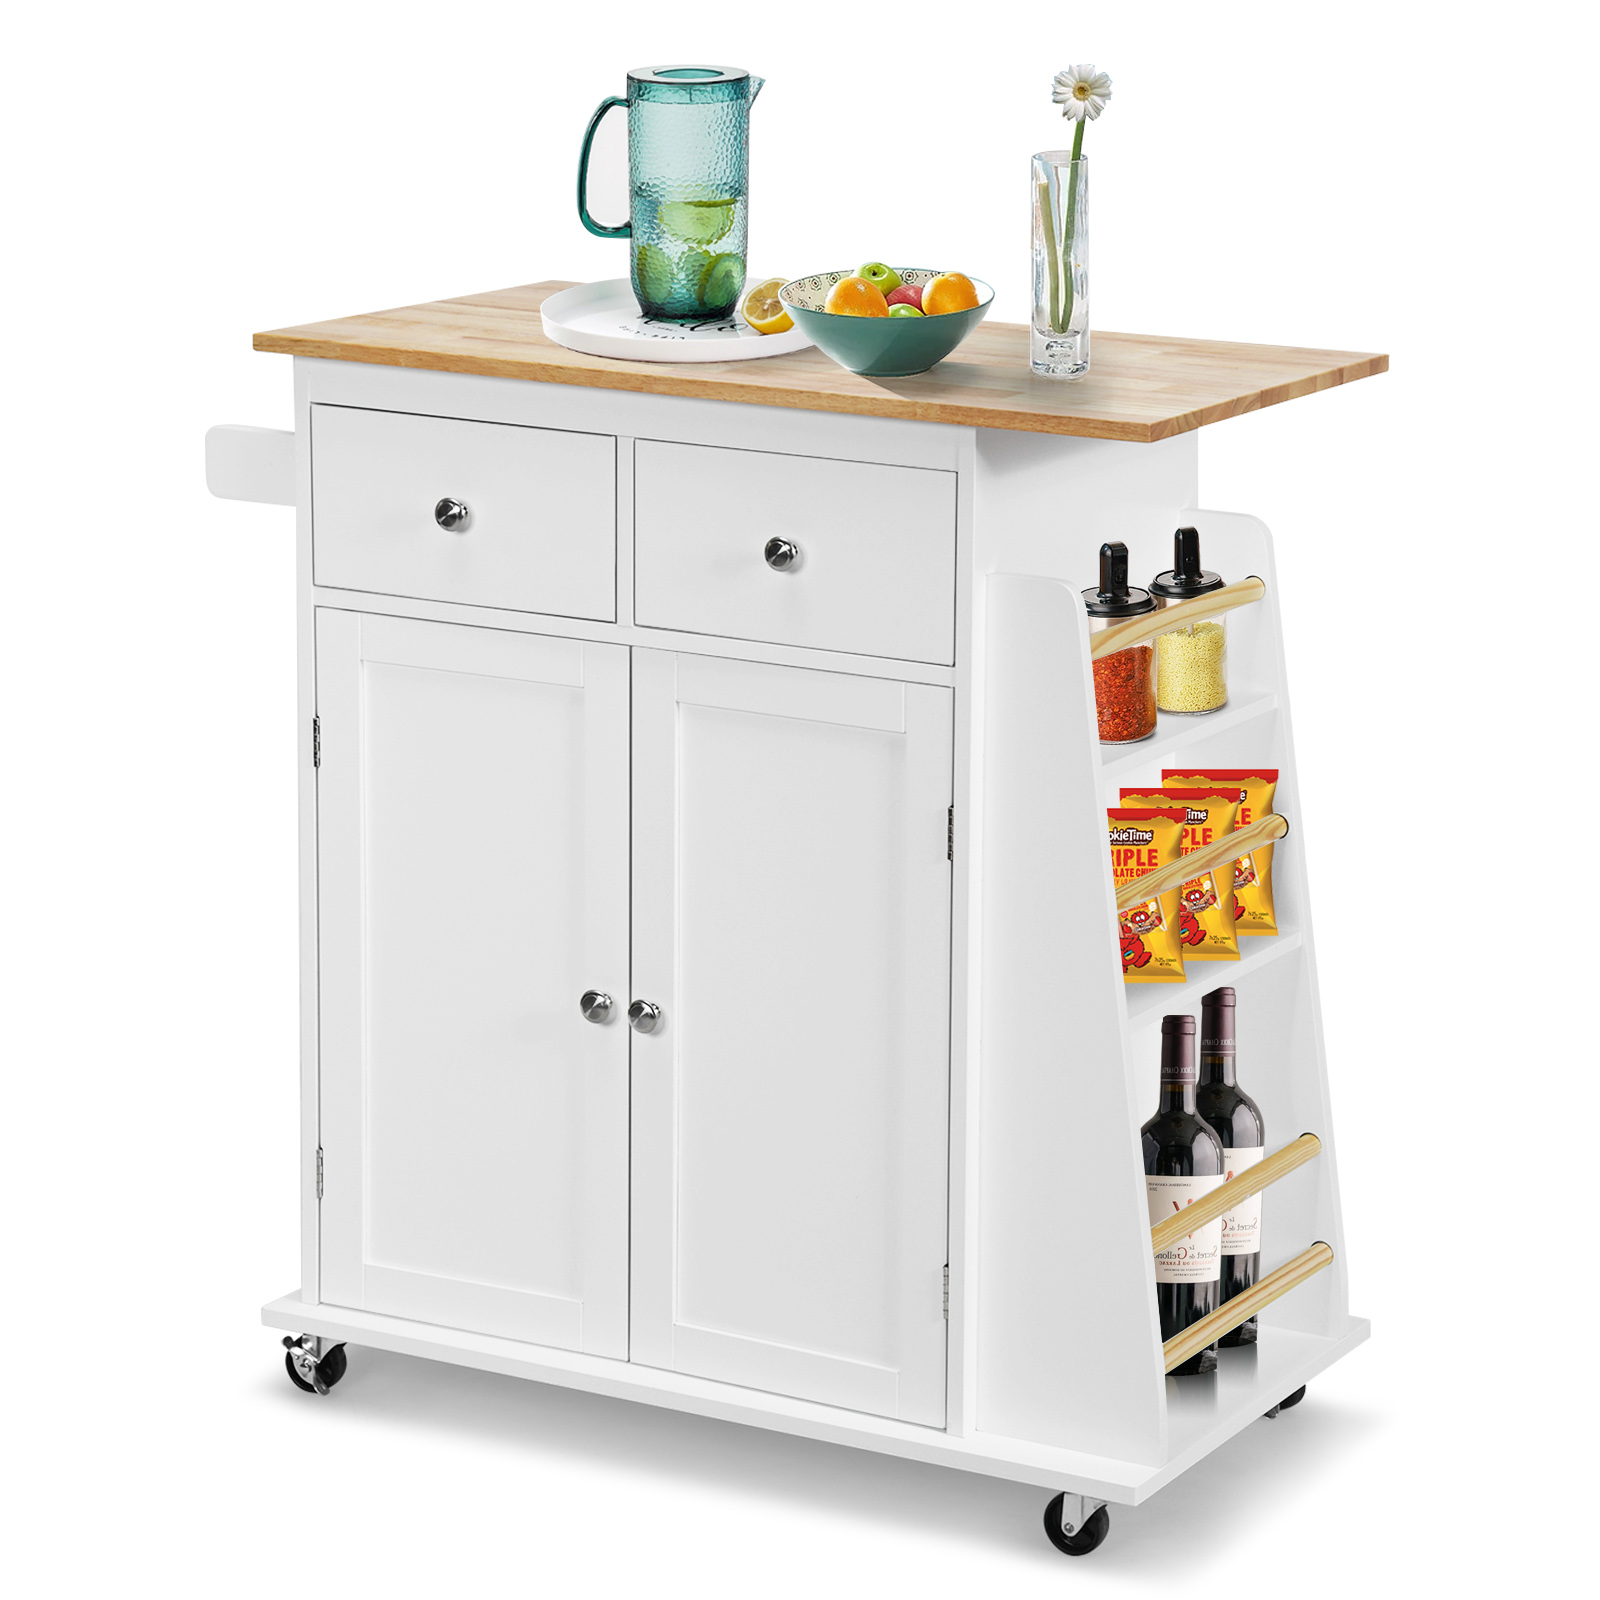 Kitchen Island with Rubber Wood Countertop and Storage on Wheels-White